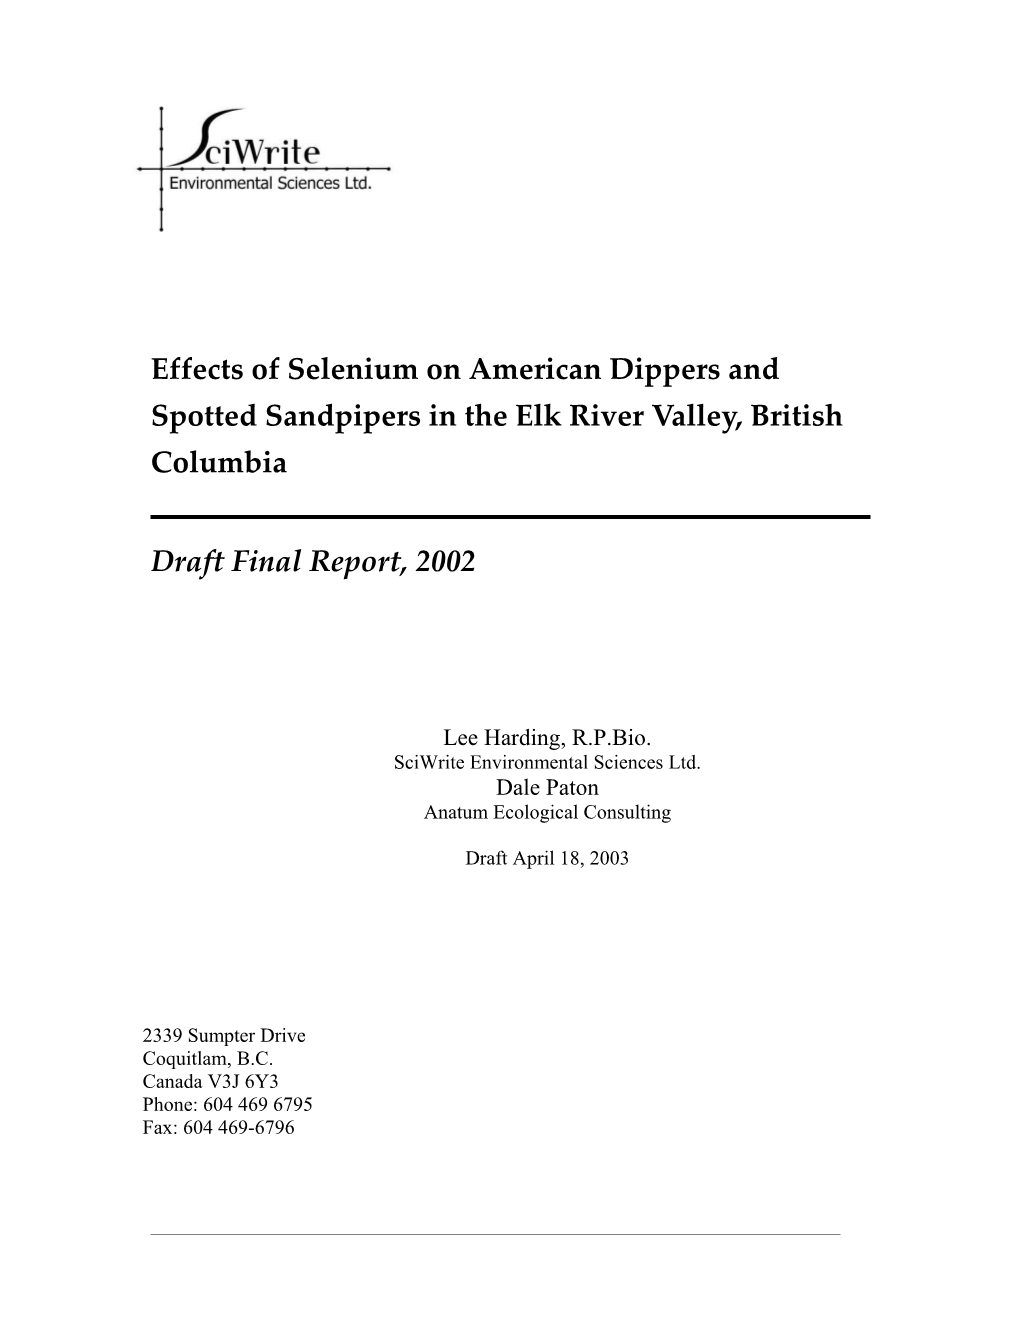 Effects of Selenium on American Dippers and Spotted Sandpipers in the Elk River Valley